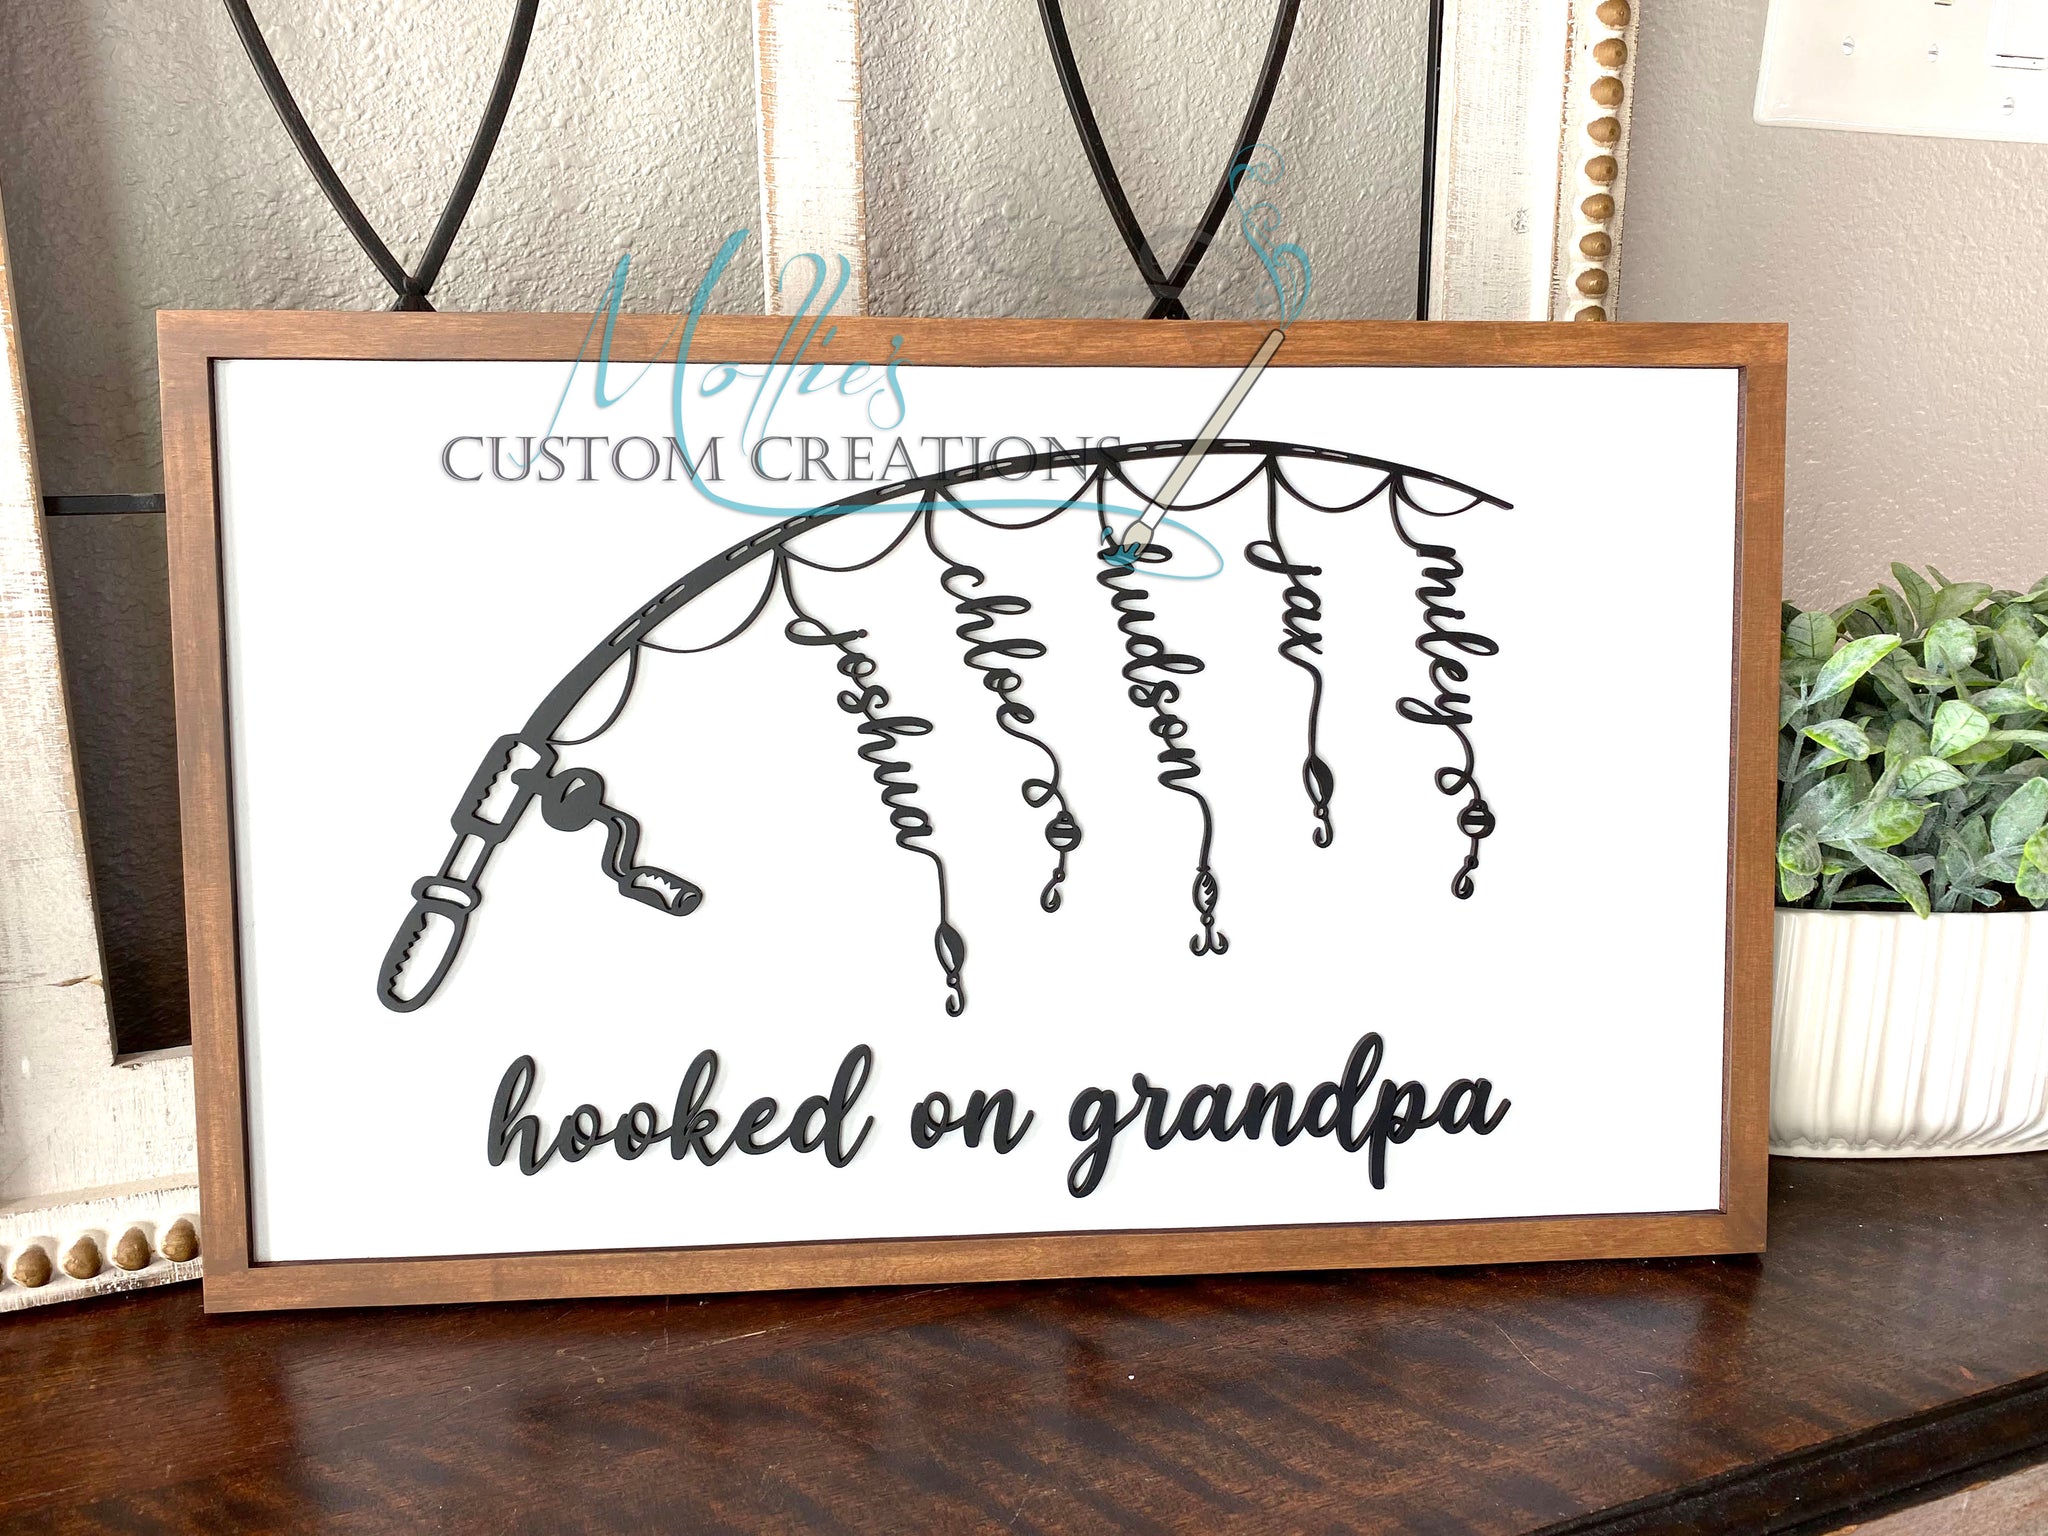 Funny Fishing Signs Gifts For Men Plaque Fisherman Sign Gift For Dad Grandad Son